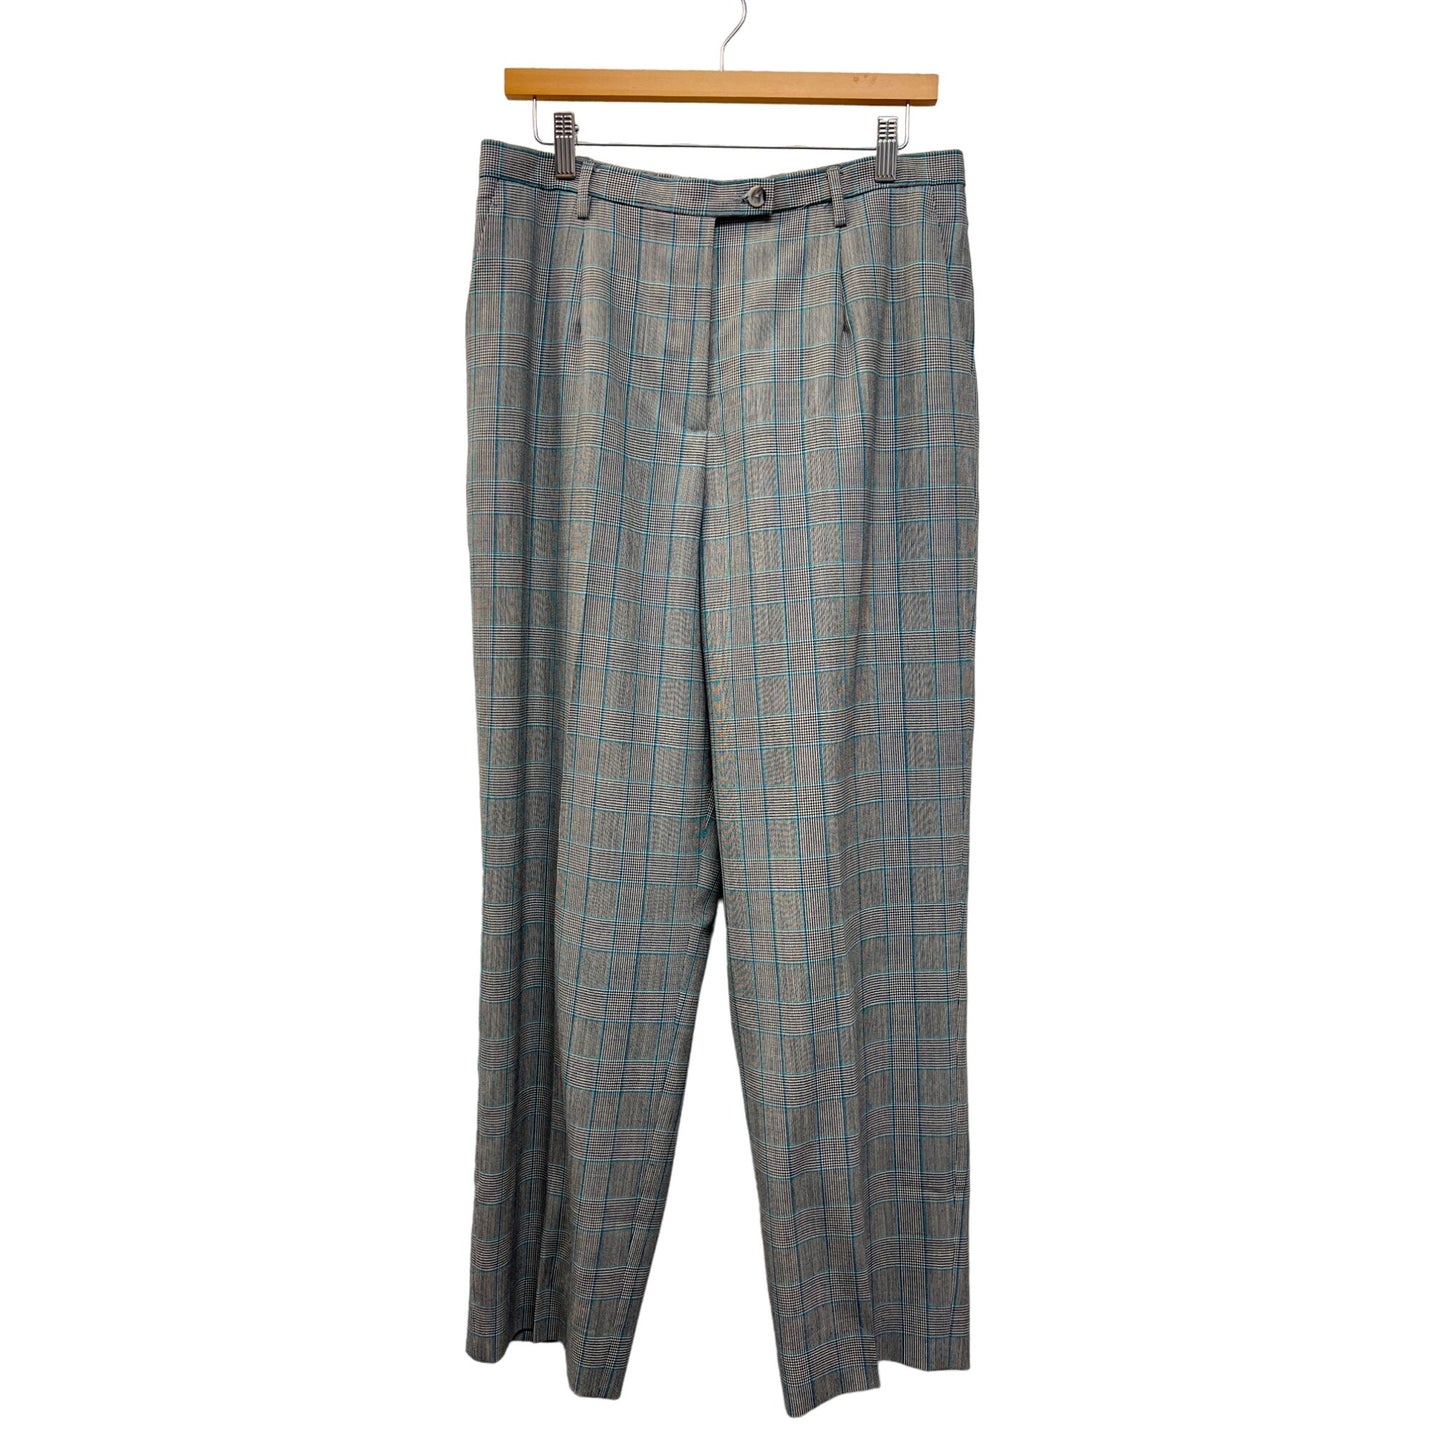 Pendleton Vintage Gray and Teal Plaid Wool Trousers